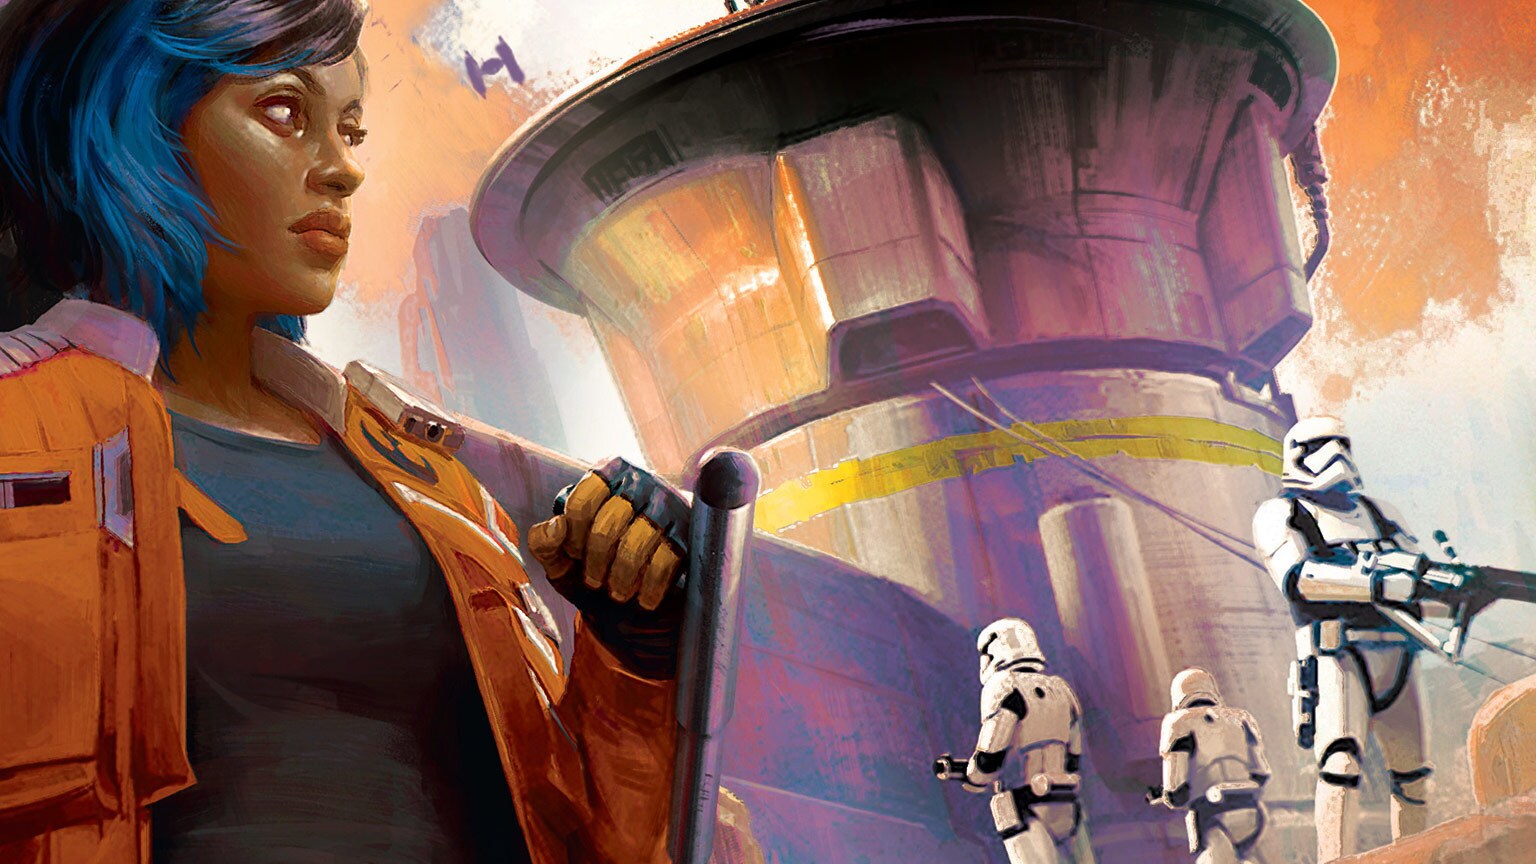 "It’s All in Black Spire": Delilah S. Dawson on Her New Star Wars: Galaxy’s Edge Novel